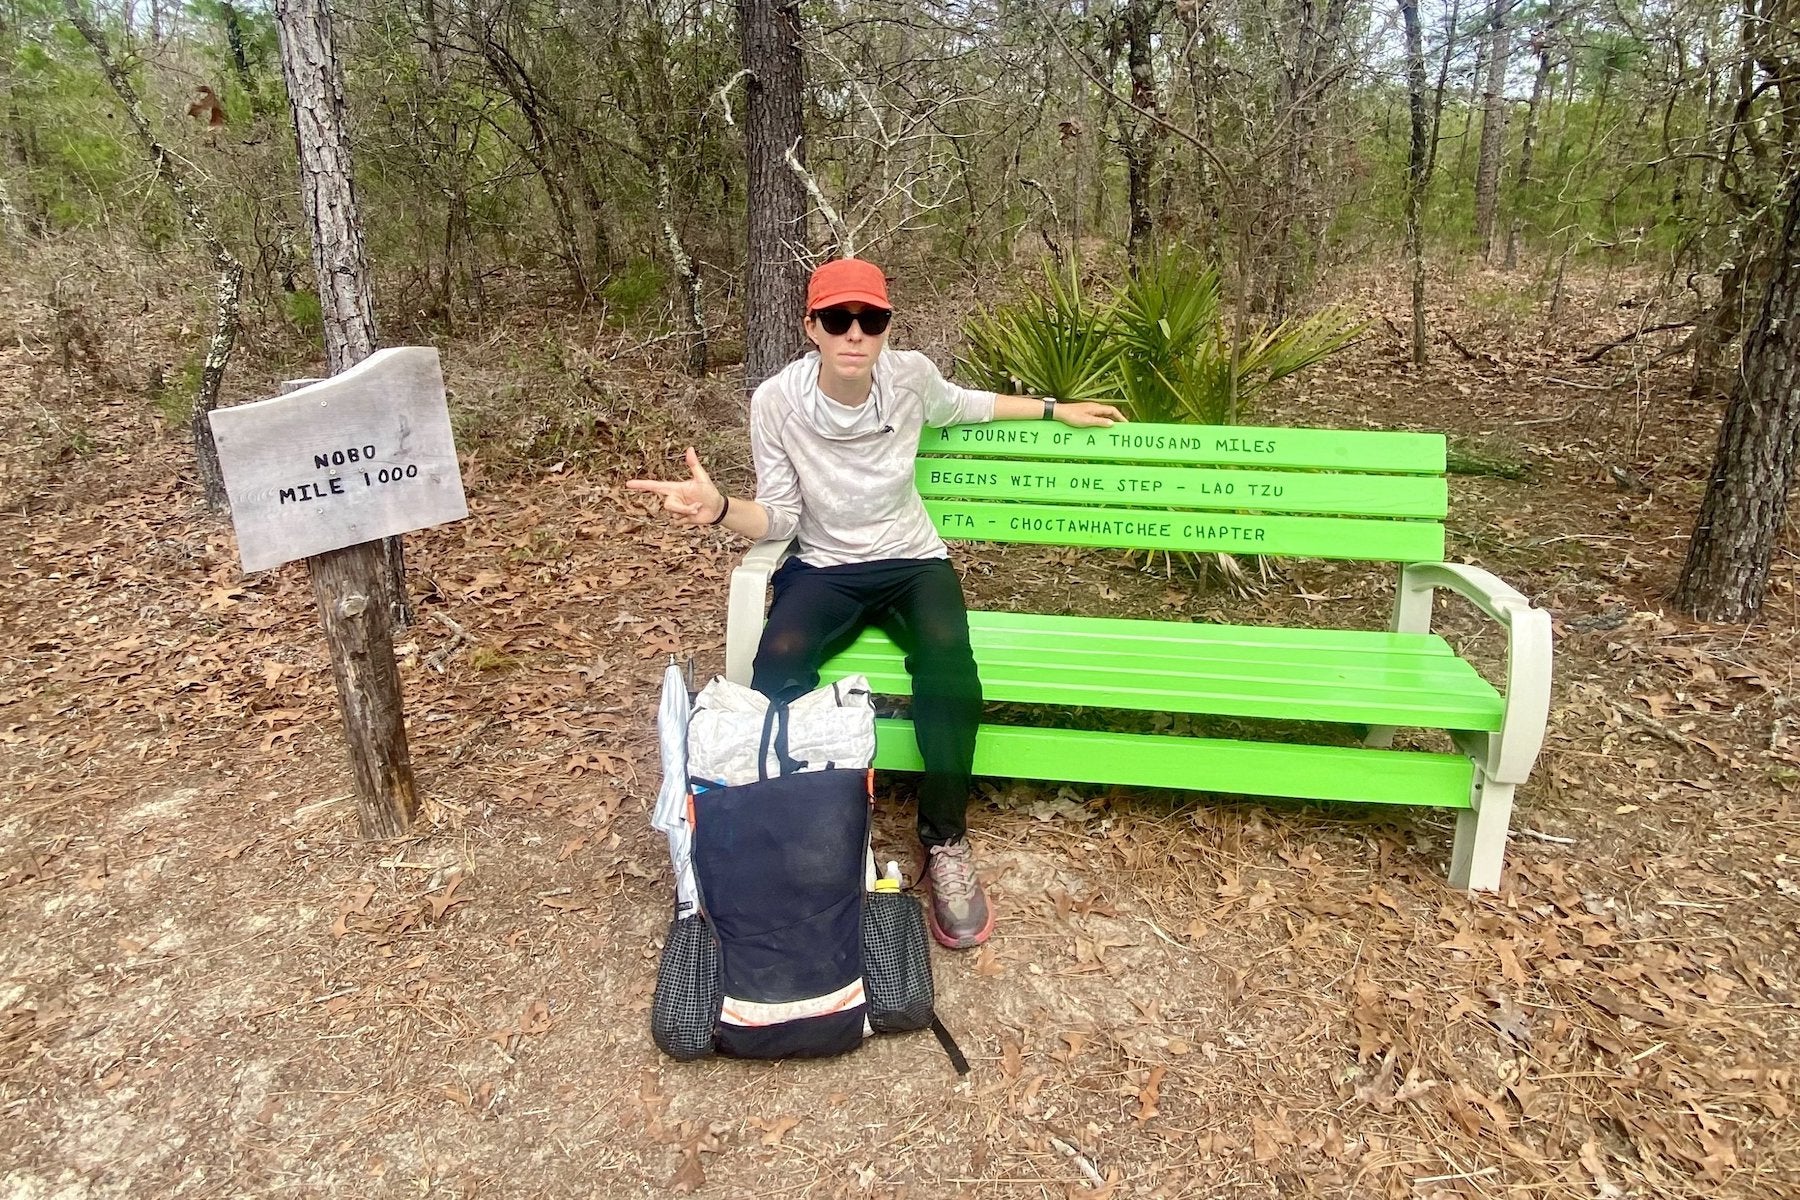 Tina Currin sits on a bench at mile marker 1000 with a Hyperlite Mountain Gear pack